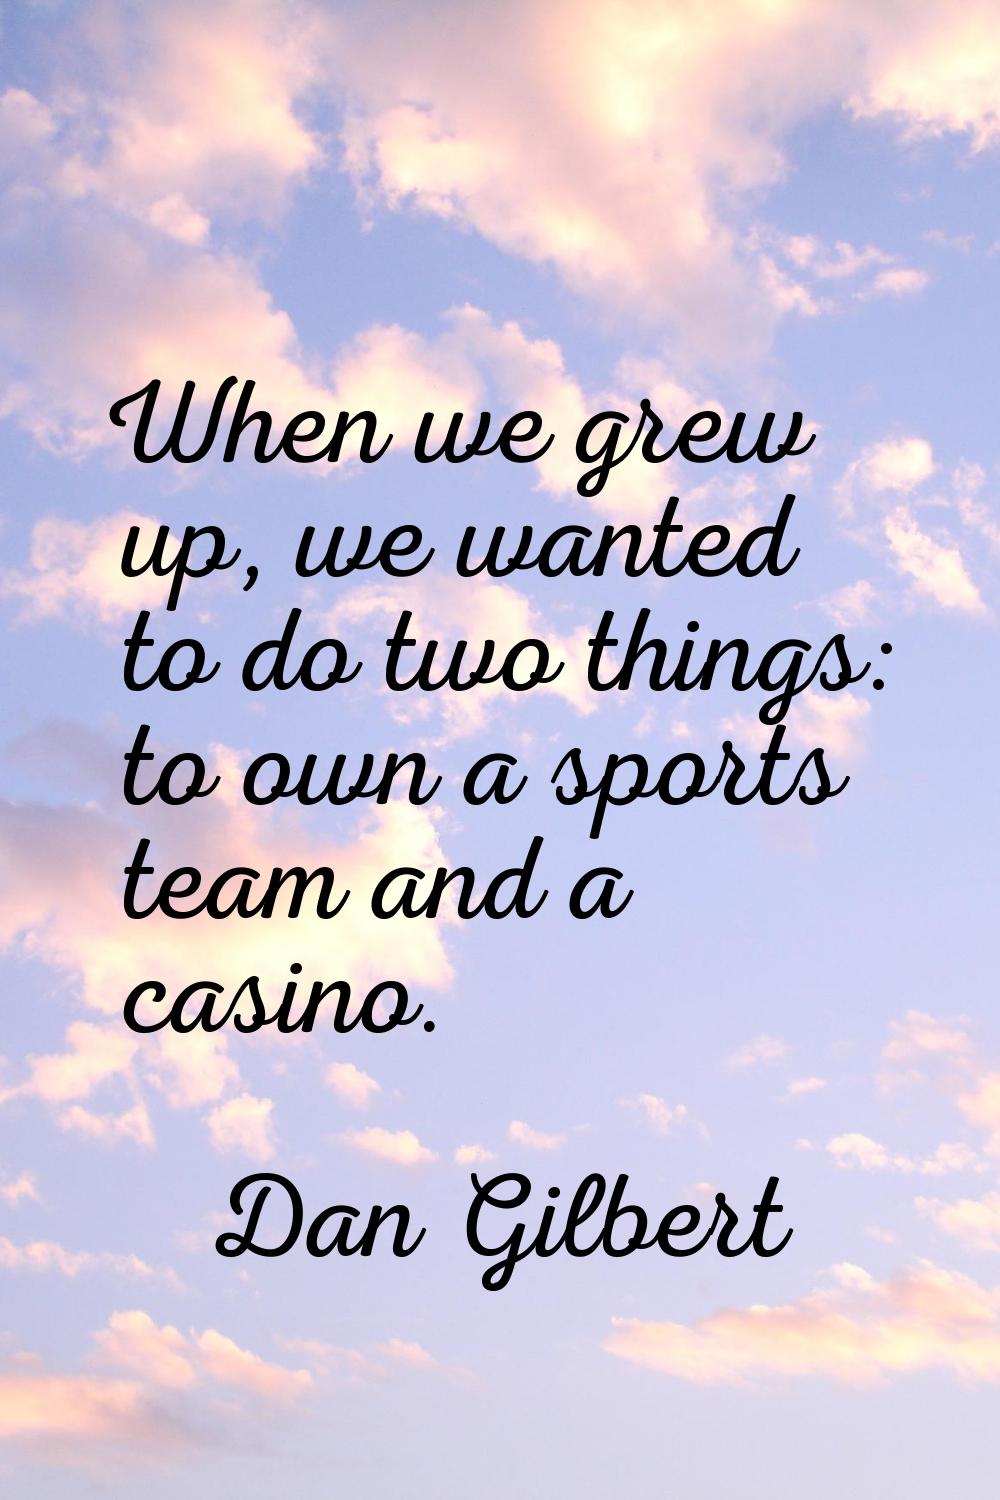 When we grew up, we wanted to do two things: to own a sports team and a casino.